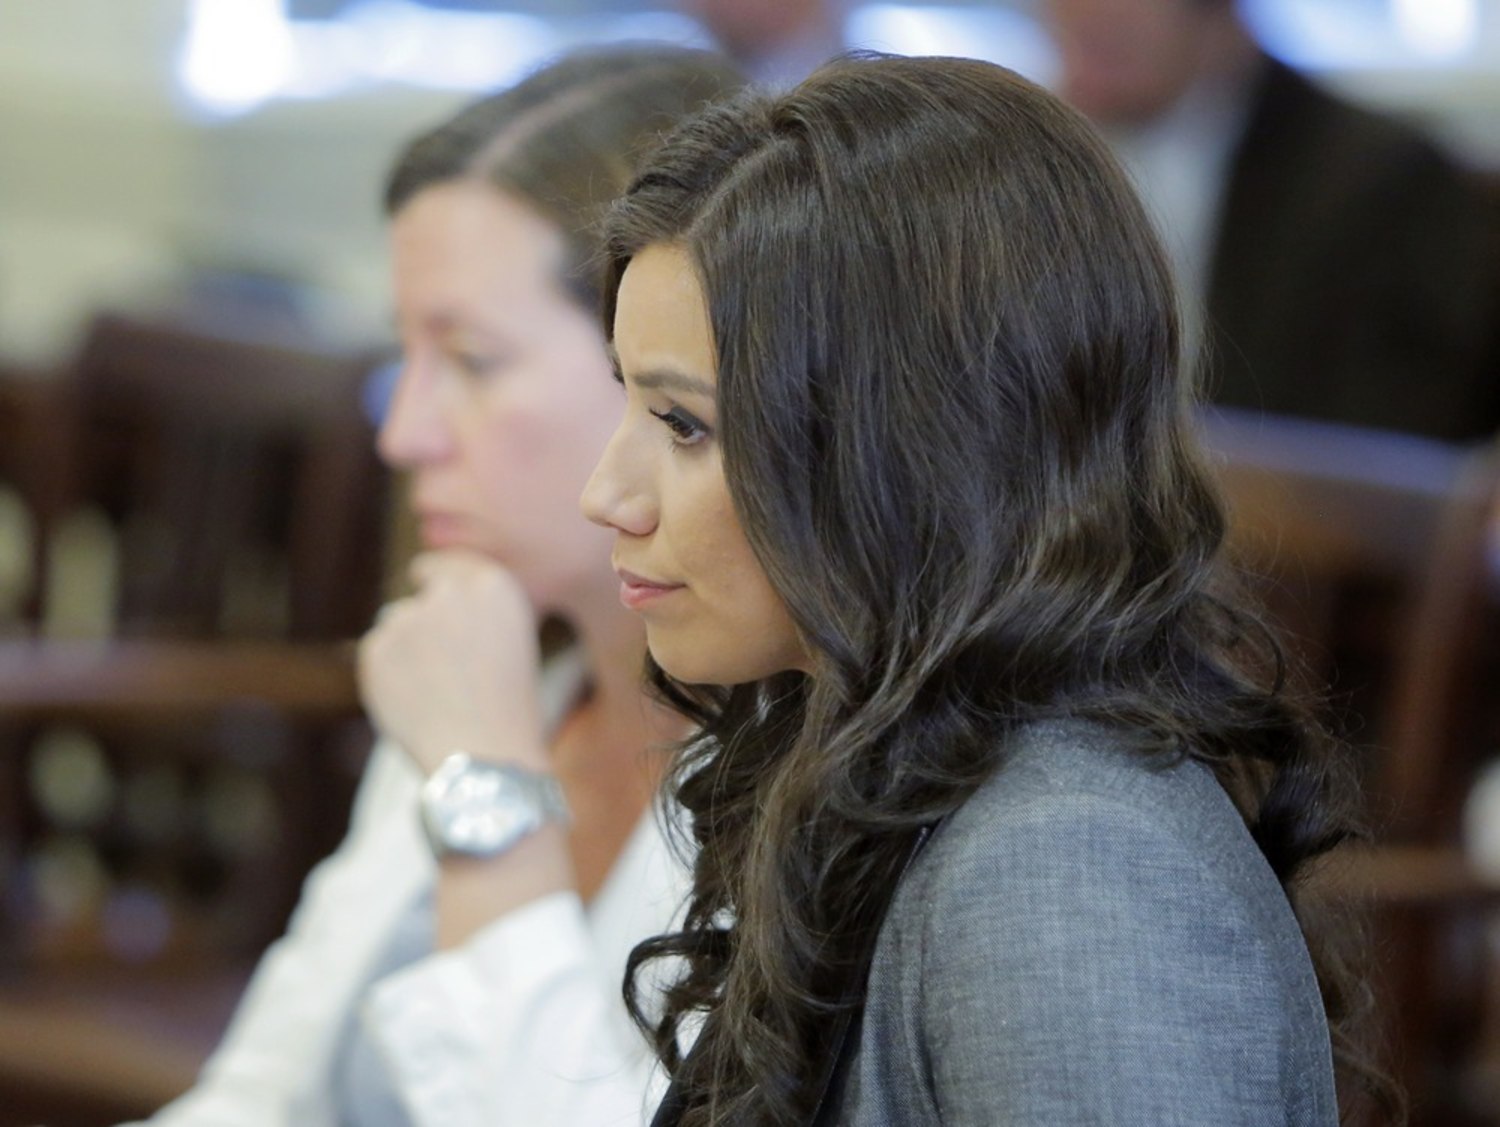 Zumba trainer speaks out at sentencing hearing